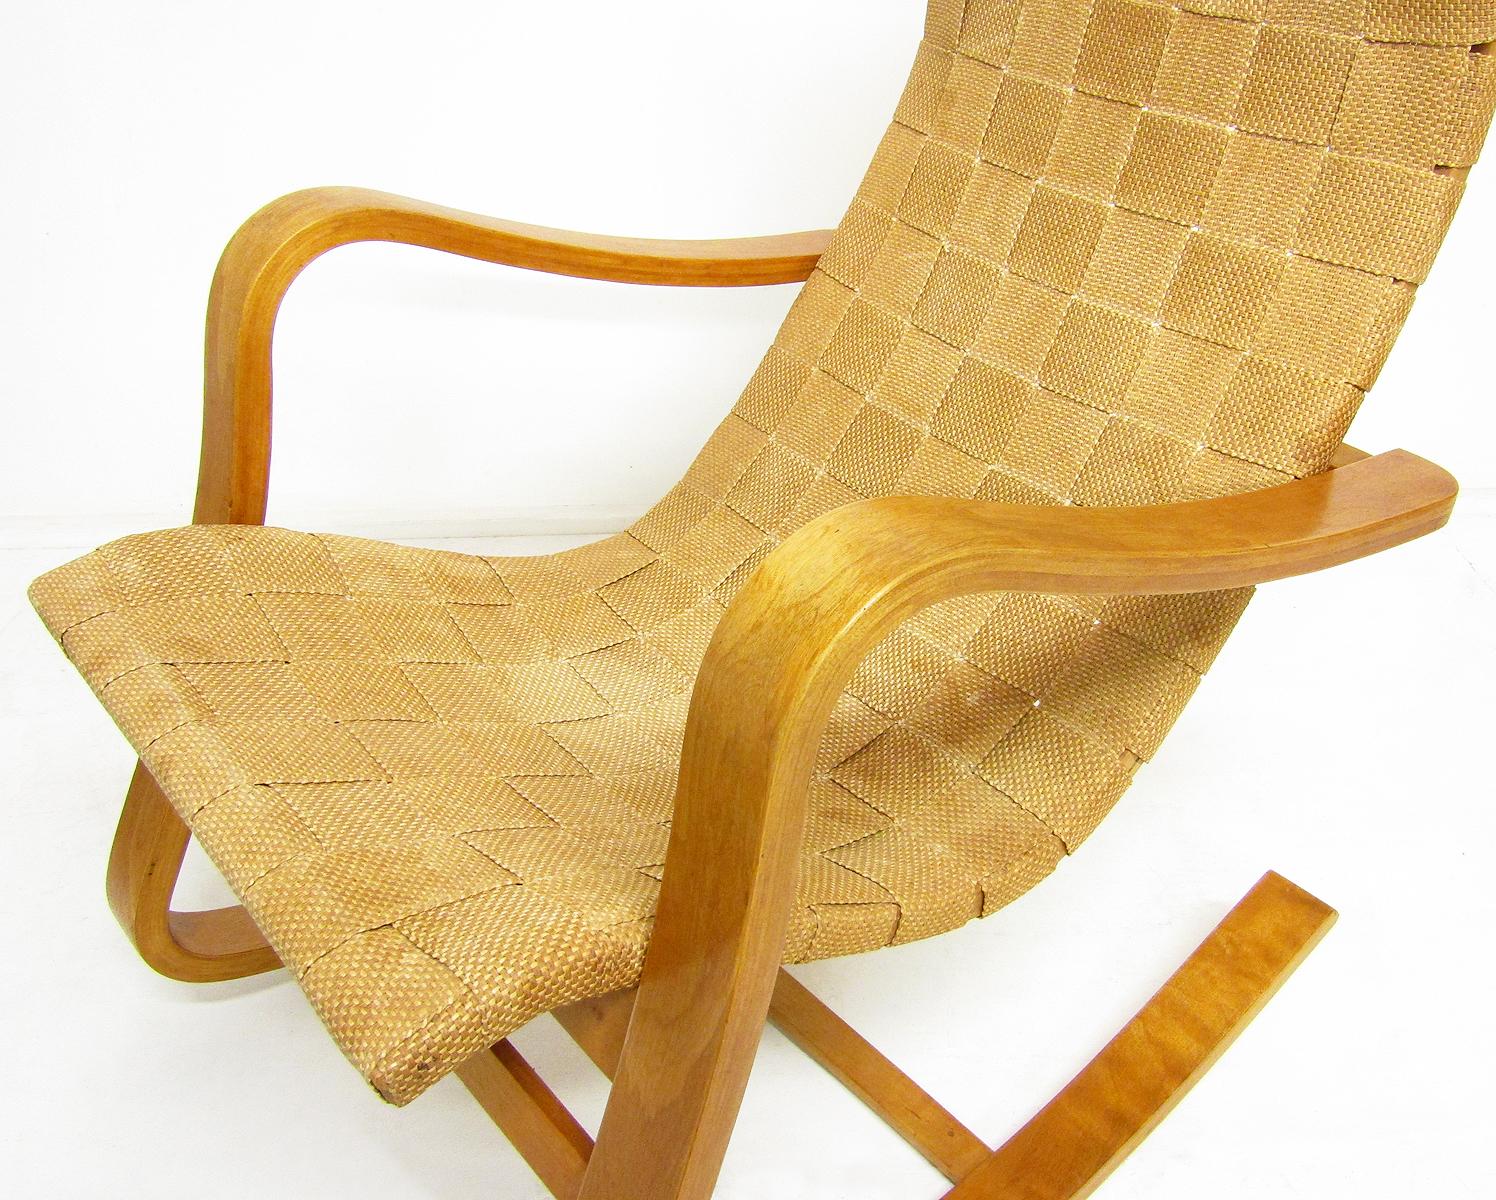 1940s Swedish Rocking Chair by Gustaf Axel Berg In Good Condition For Sale In Shepperton, Surrey